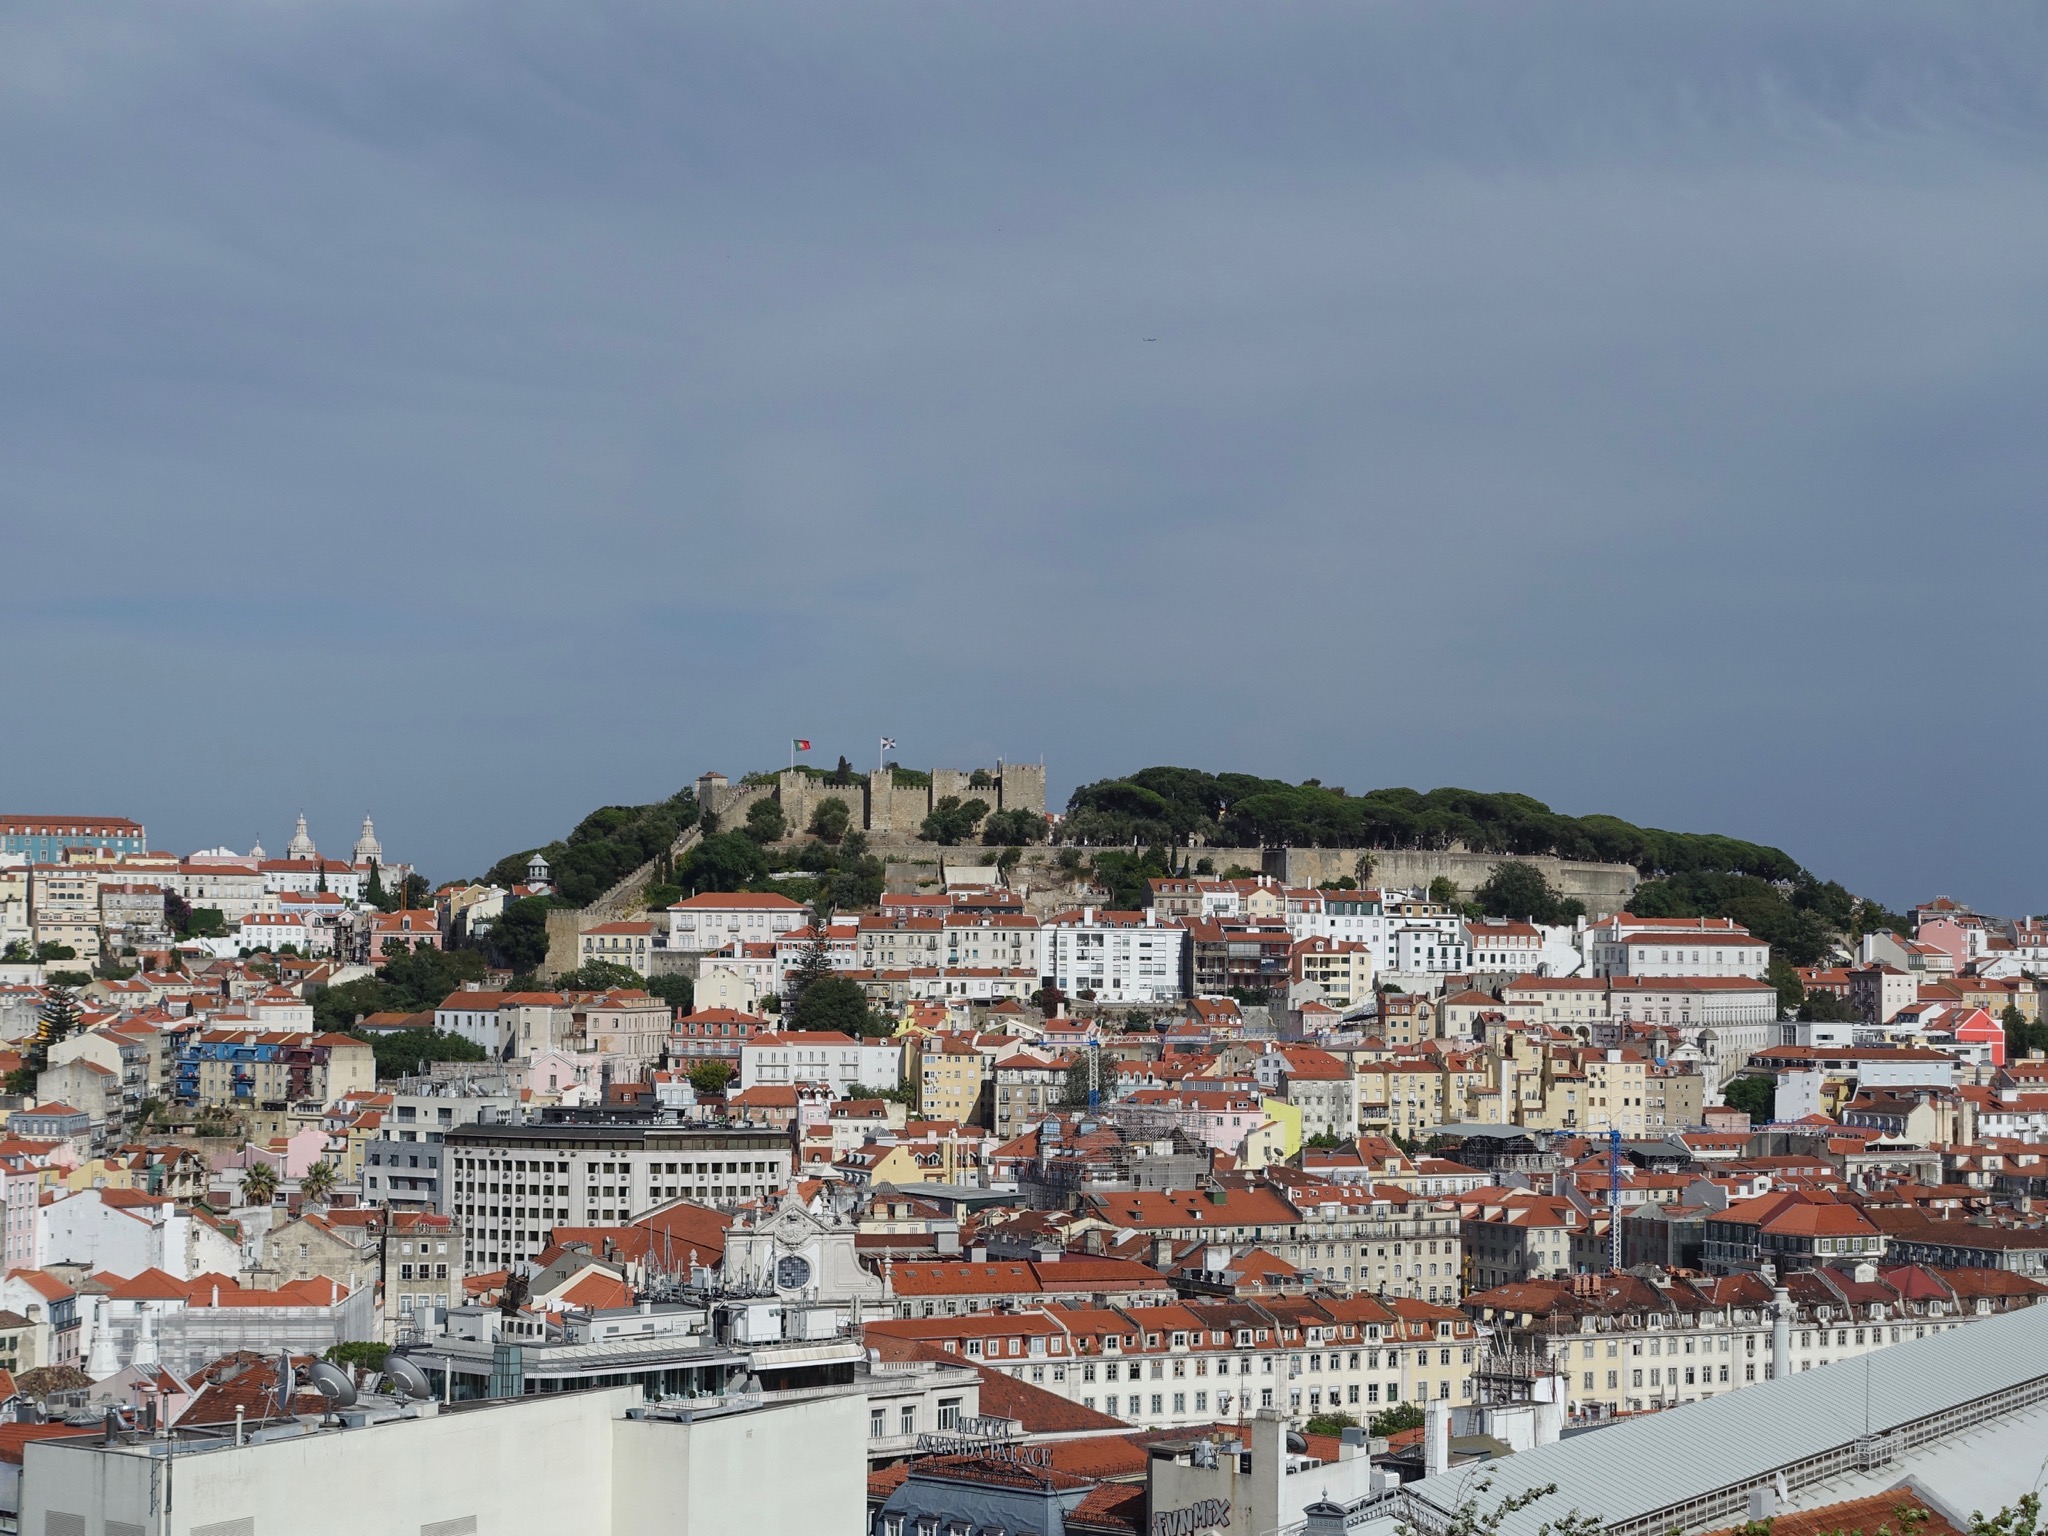 Photo 3 of 86 from the album Highlights Lisbon 2015.